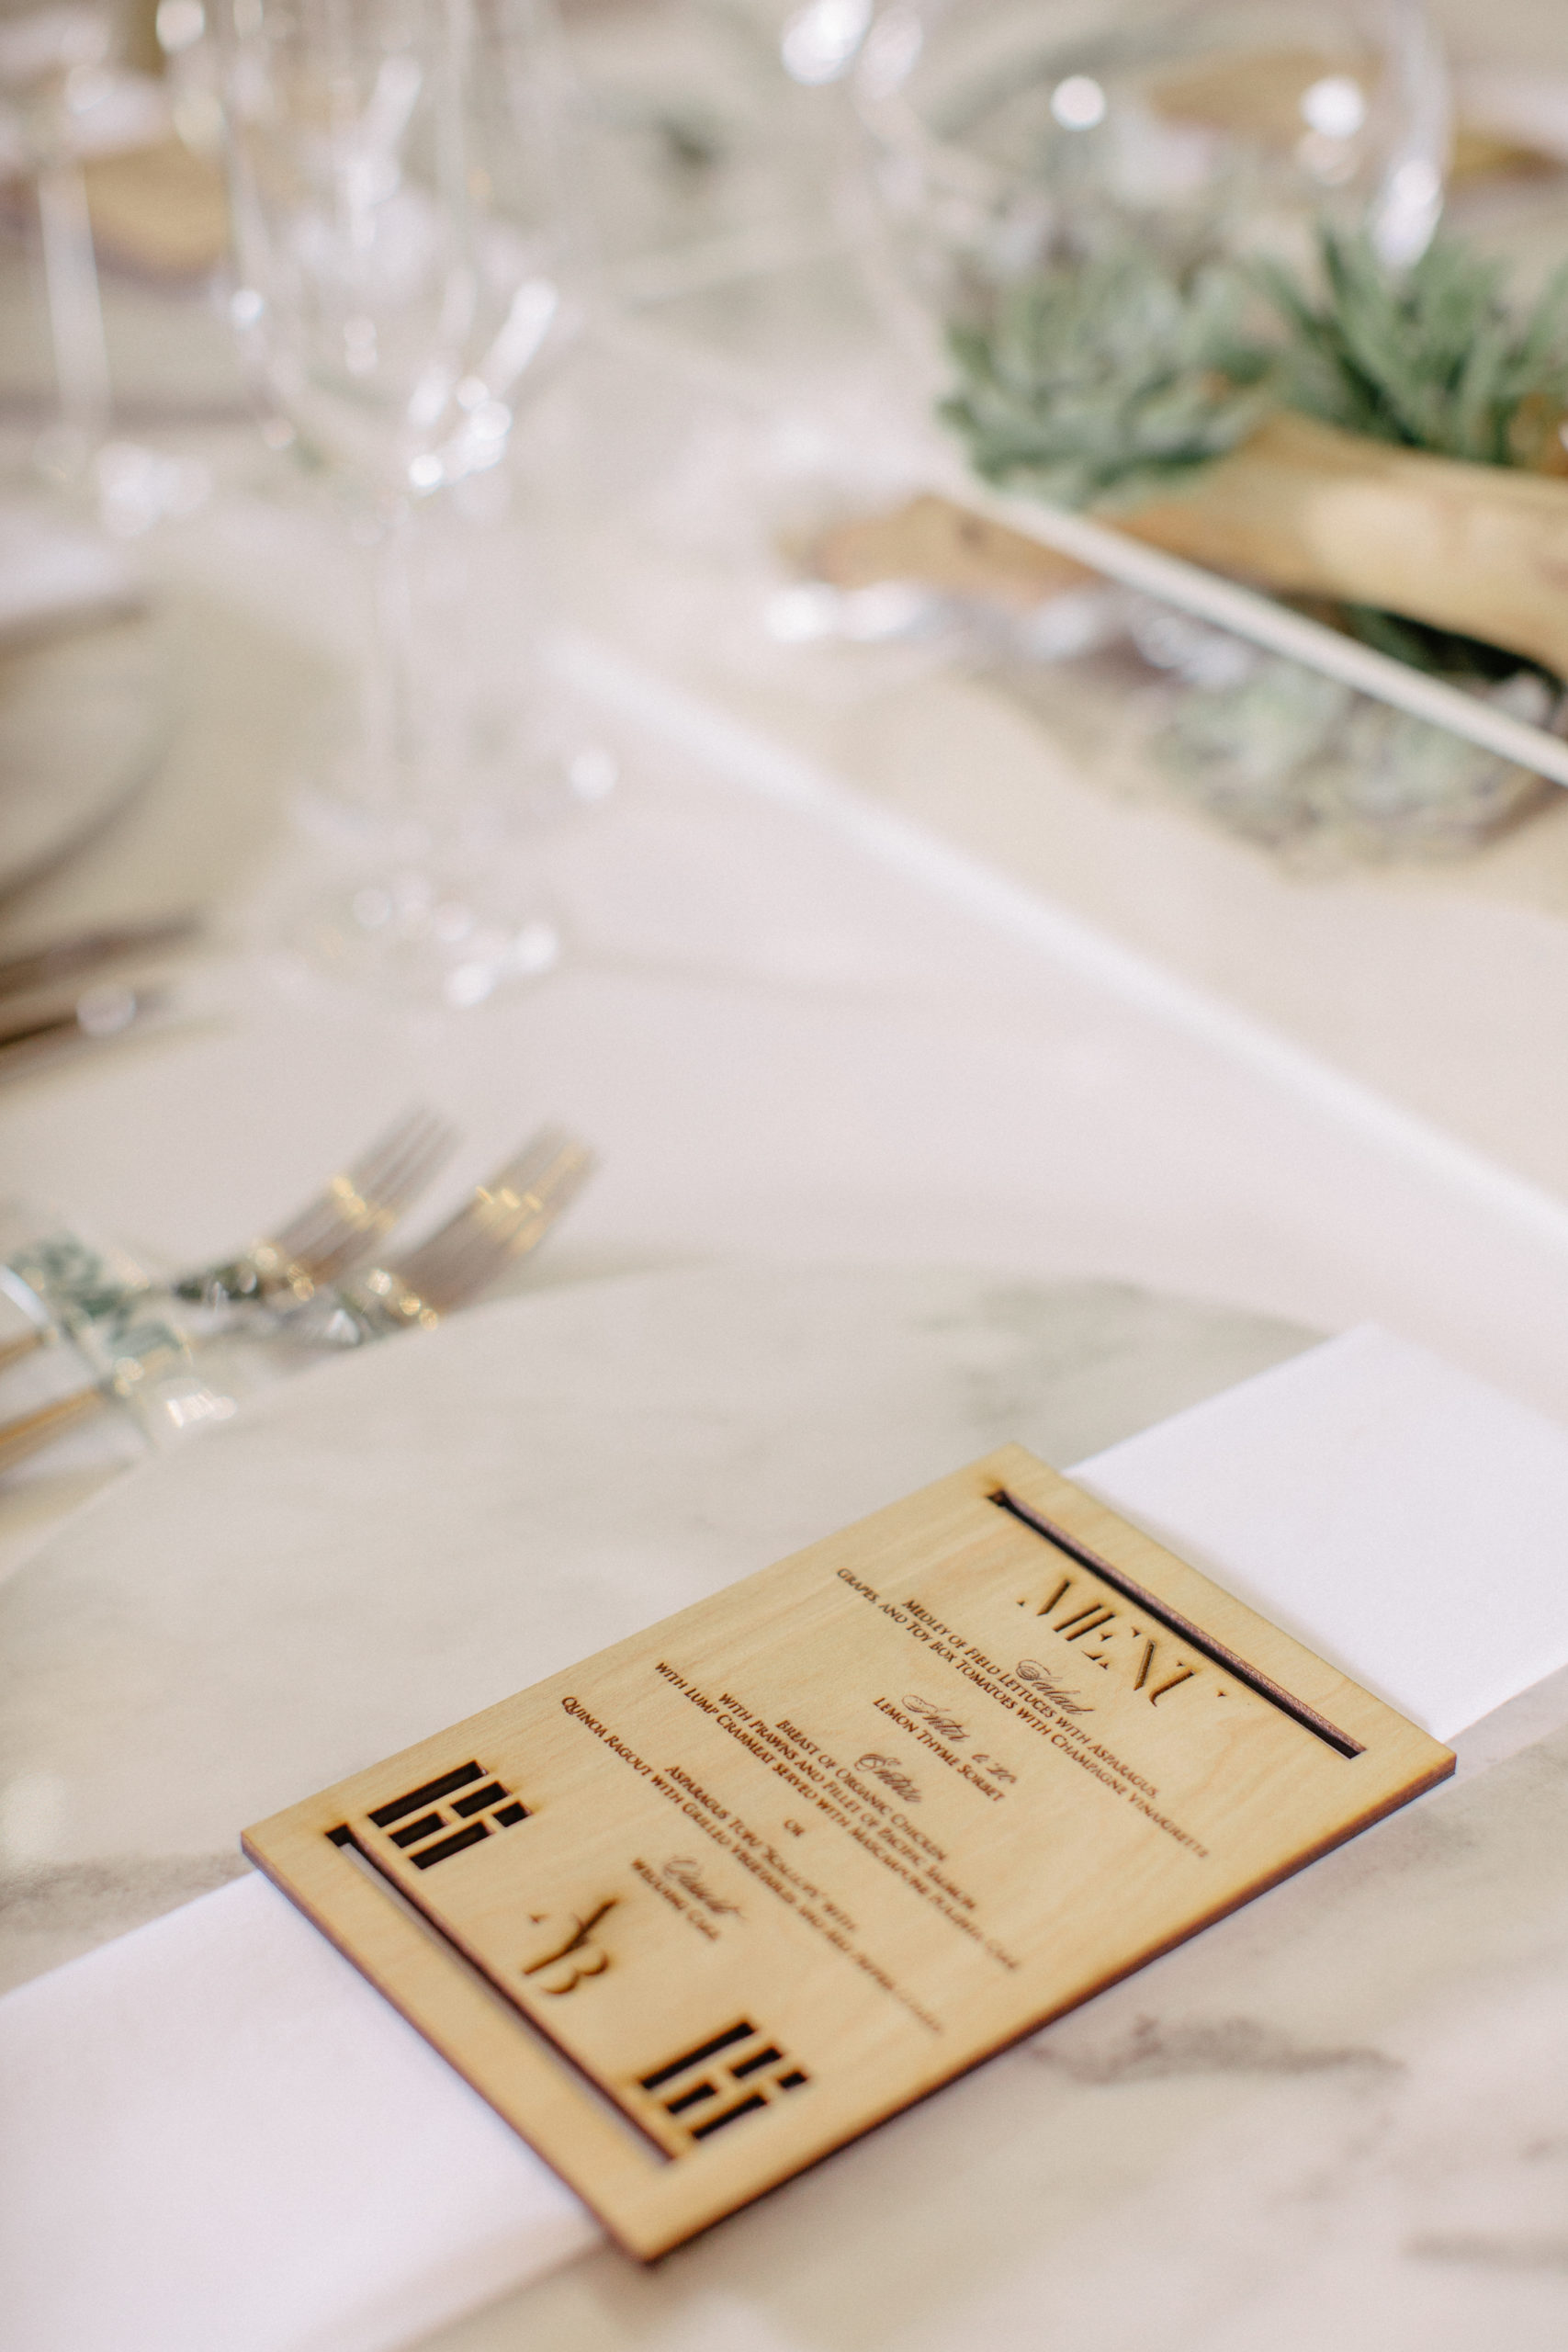 Acrylic wedding table with white wood dowel chairs and statement chairs at either end, featuring marble charger plates and resin name plates that served as unique place cards with a wood engraved menu buckle | Laser cut wood engraved menus